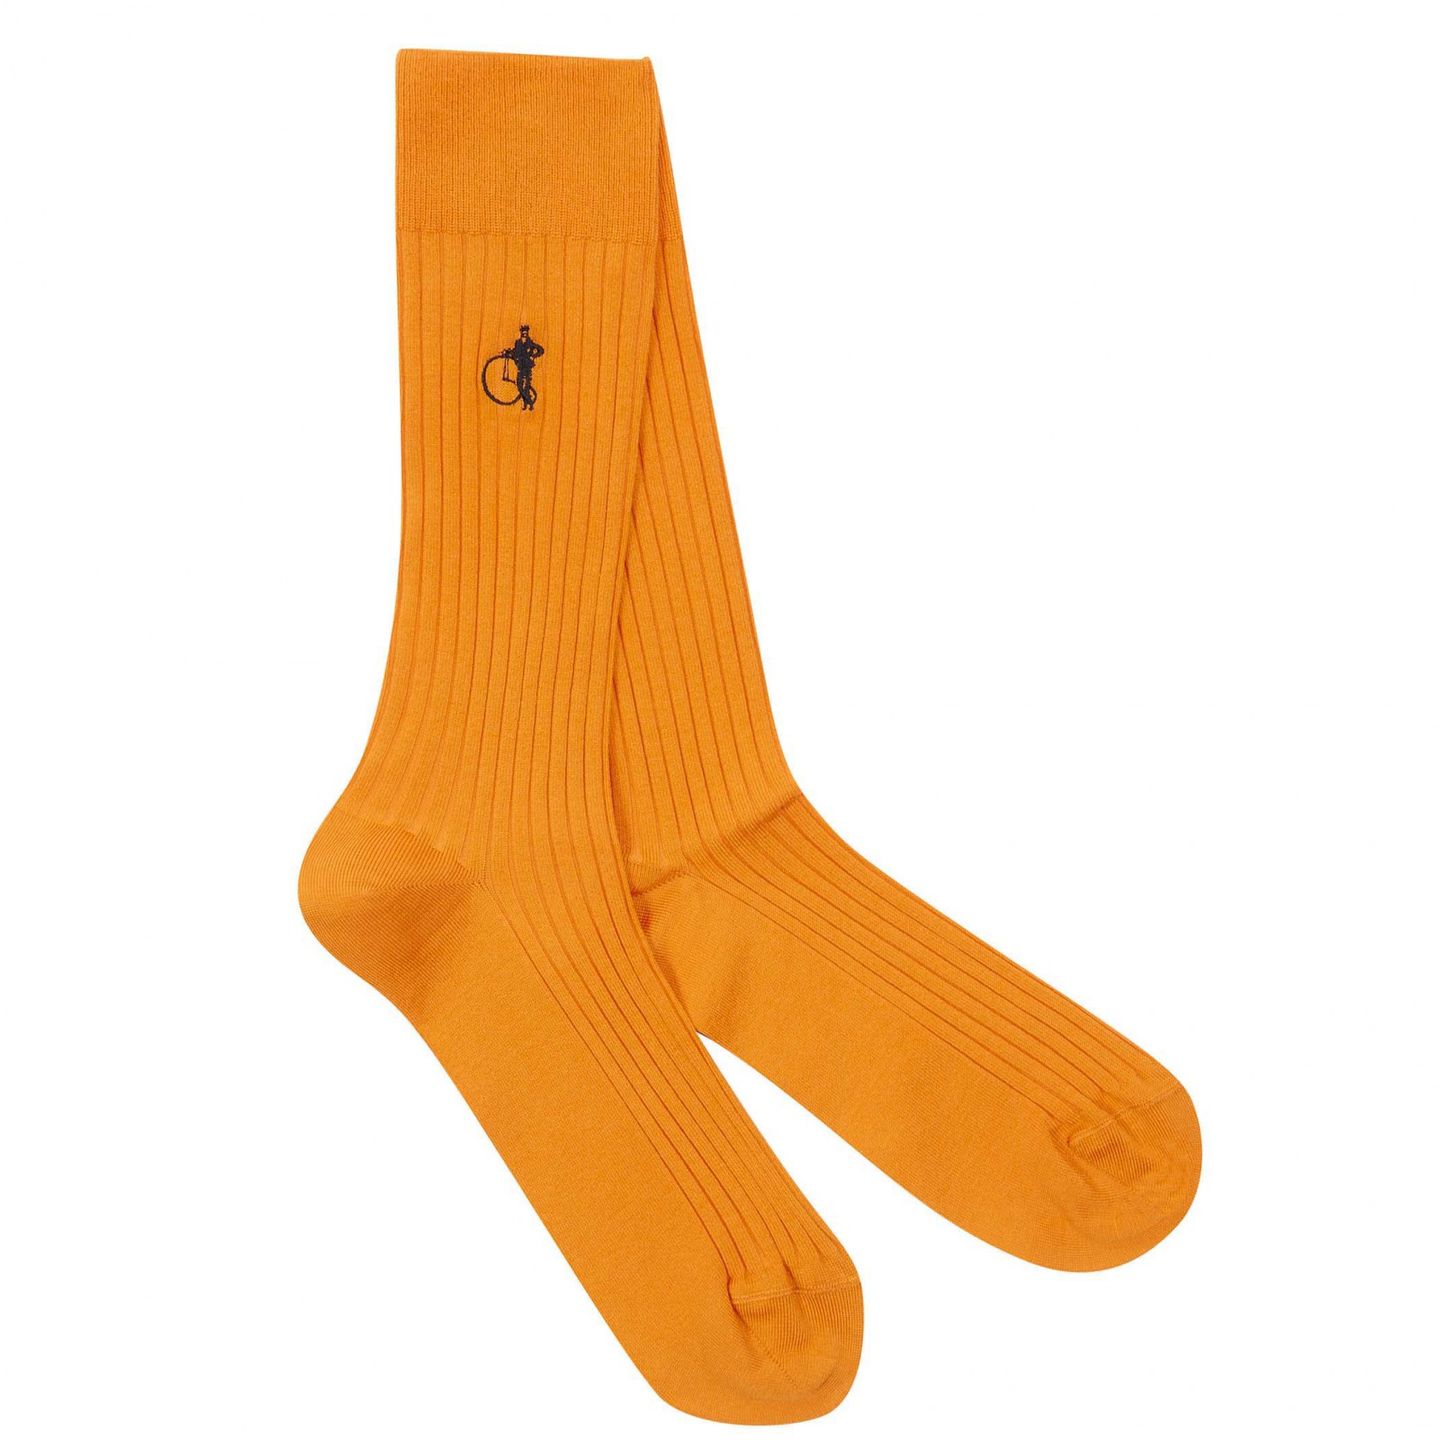 Mustard pair of Sartorial socks on a white background